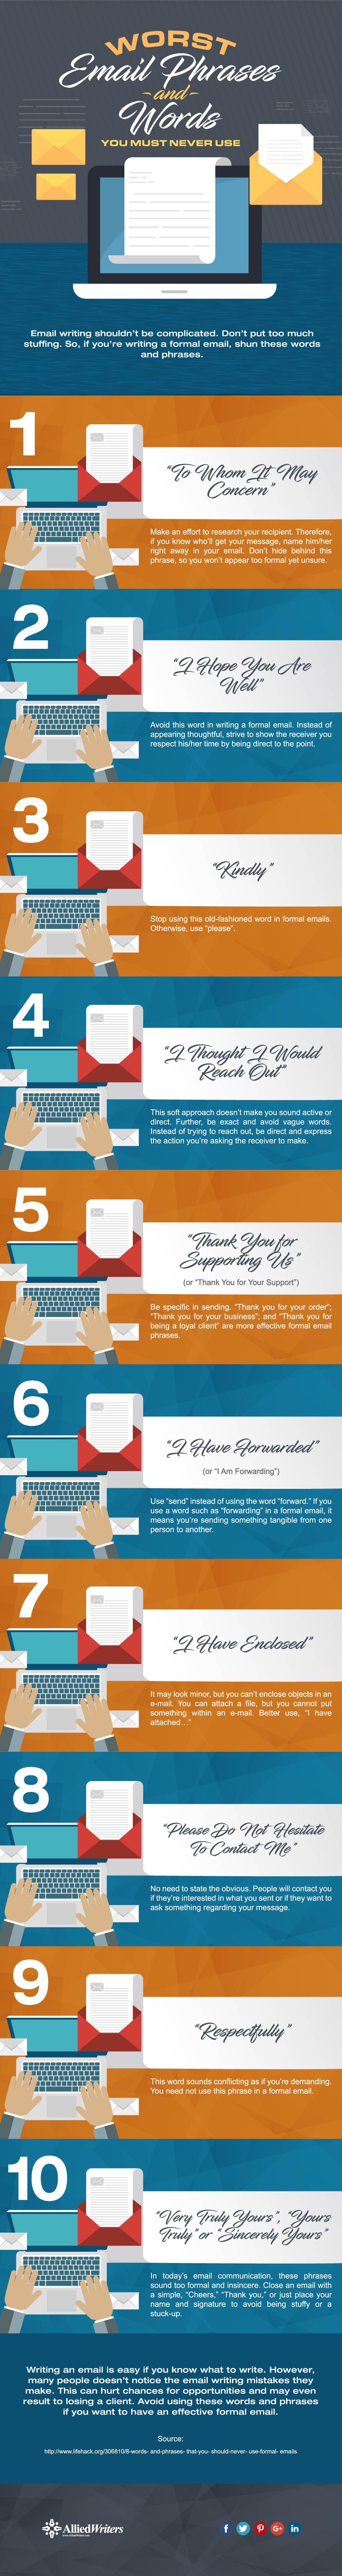 worst email phrase and words you must never use_infographic